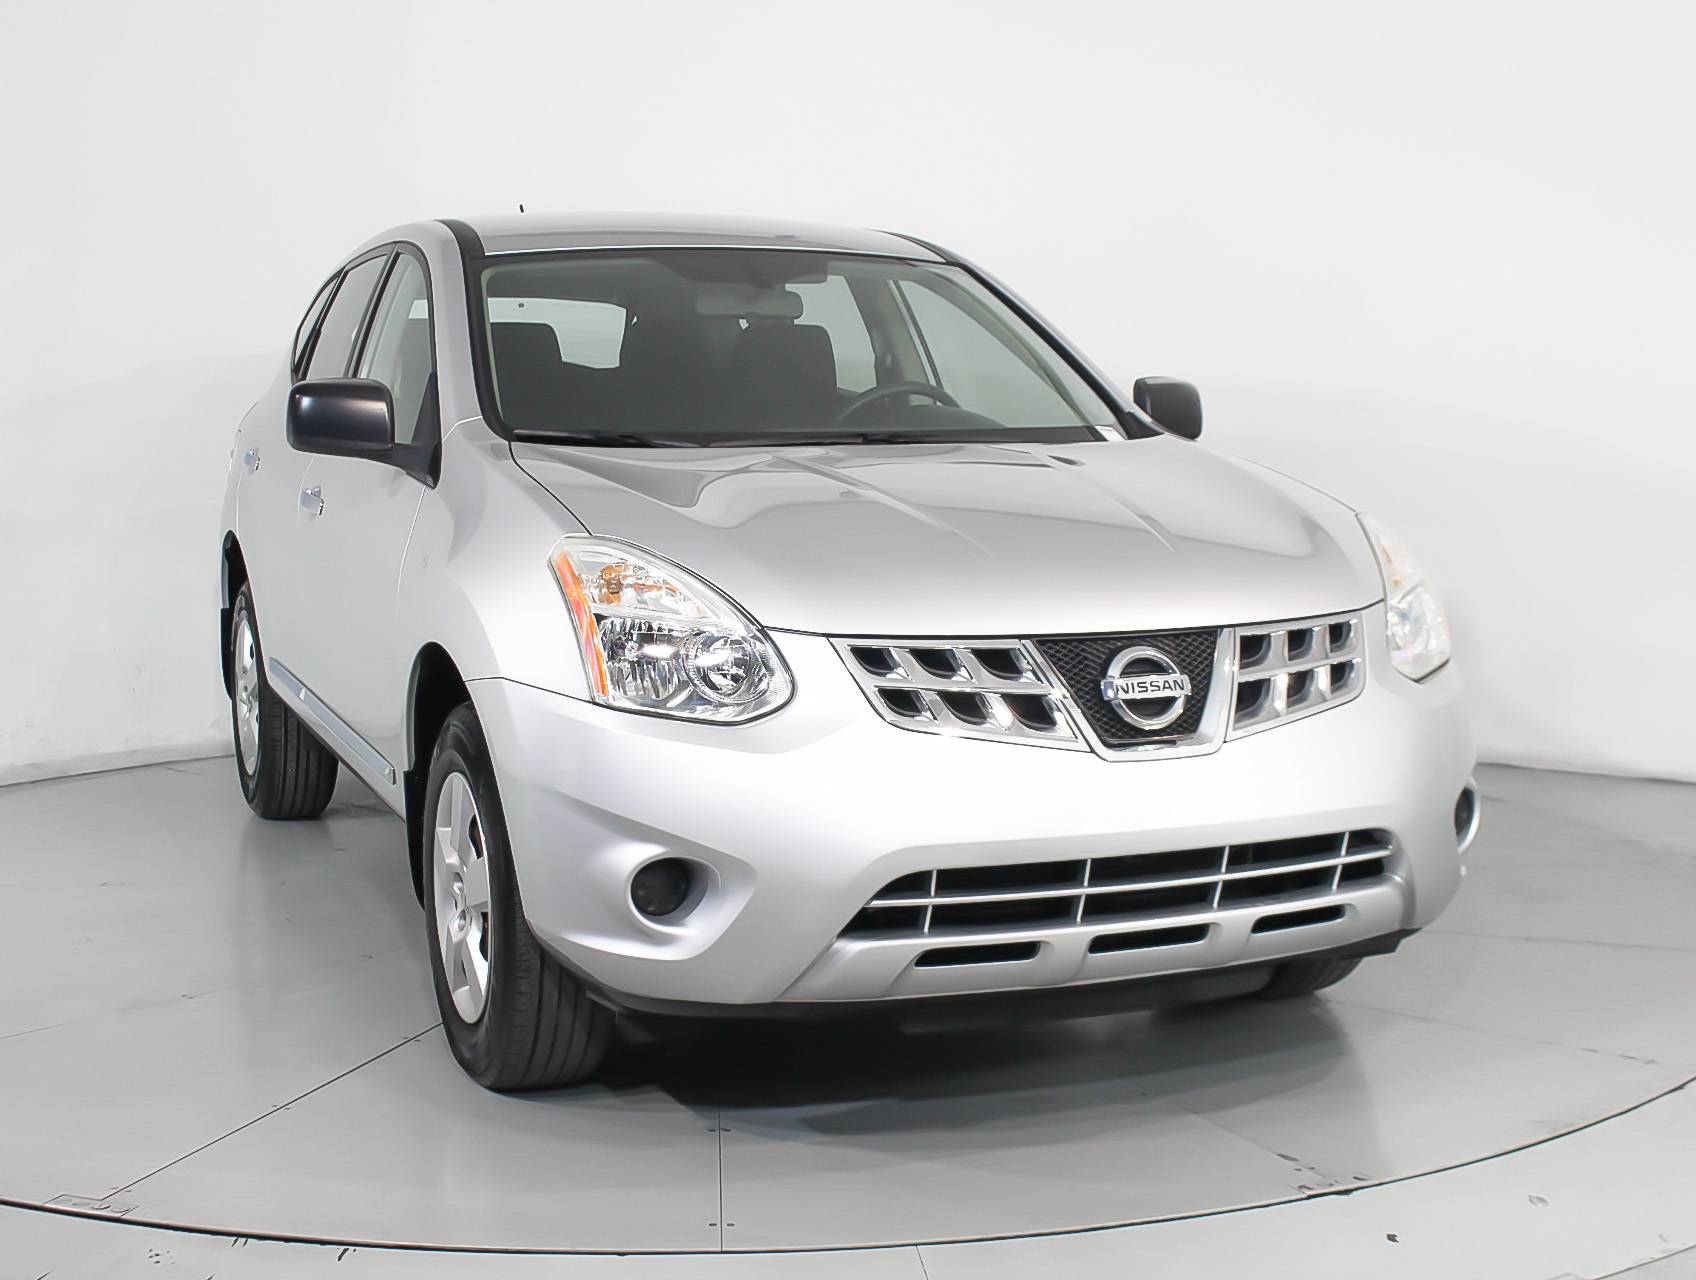 Florida Fine Cars - Used NISSAN ROGUE 2012 HOLLYWOOD S